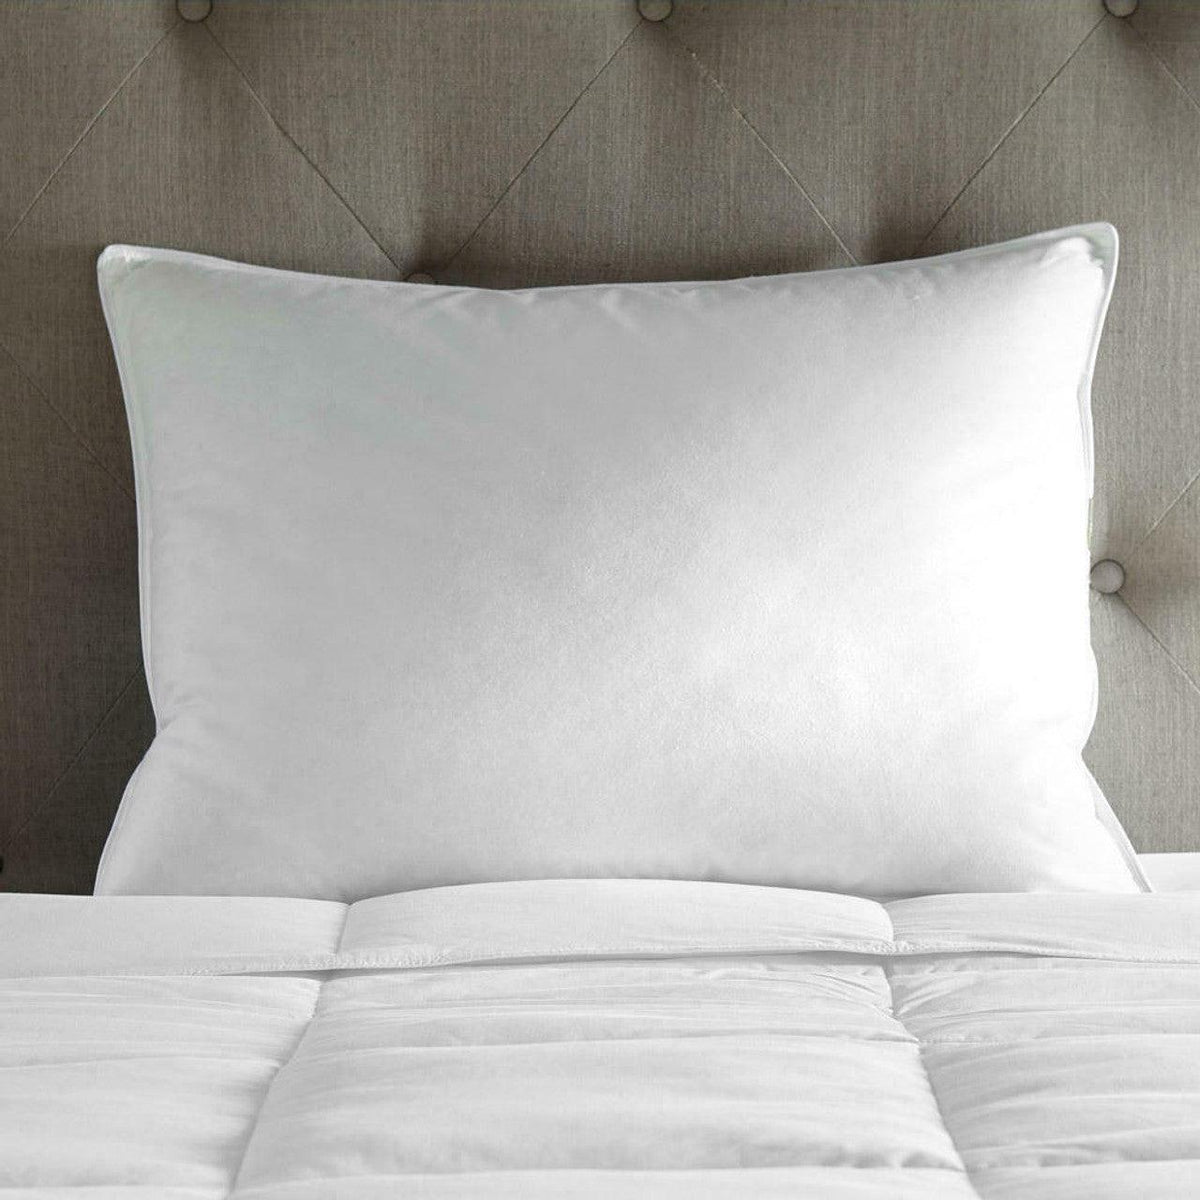 50/50 Down & Feather Medium Hotel Pillow for Side Sleepers (Hypoallergenic) - beddingbag.com